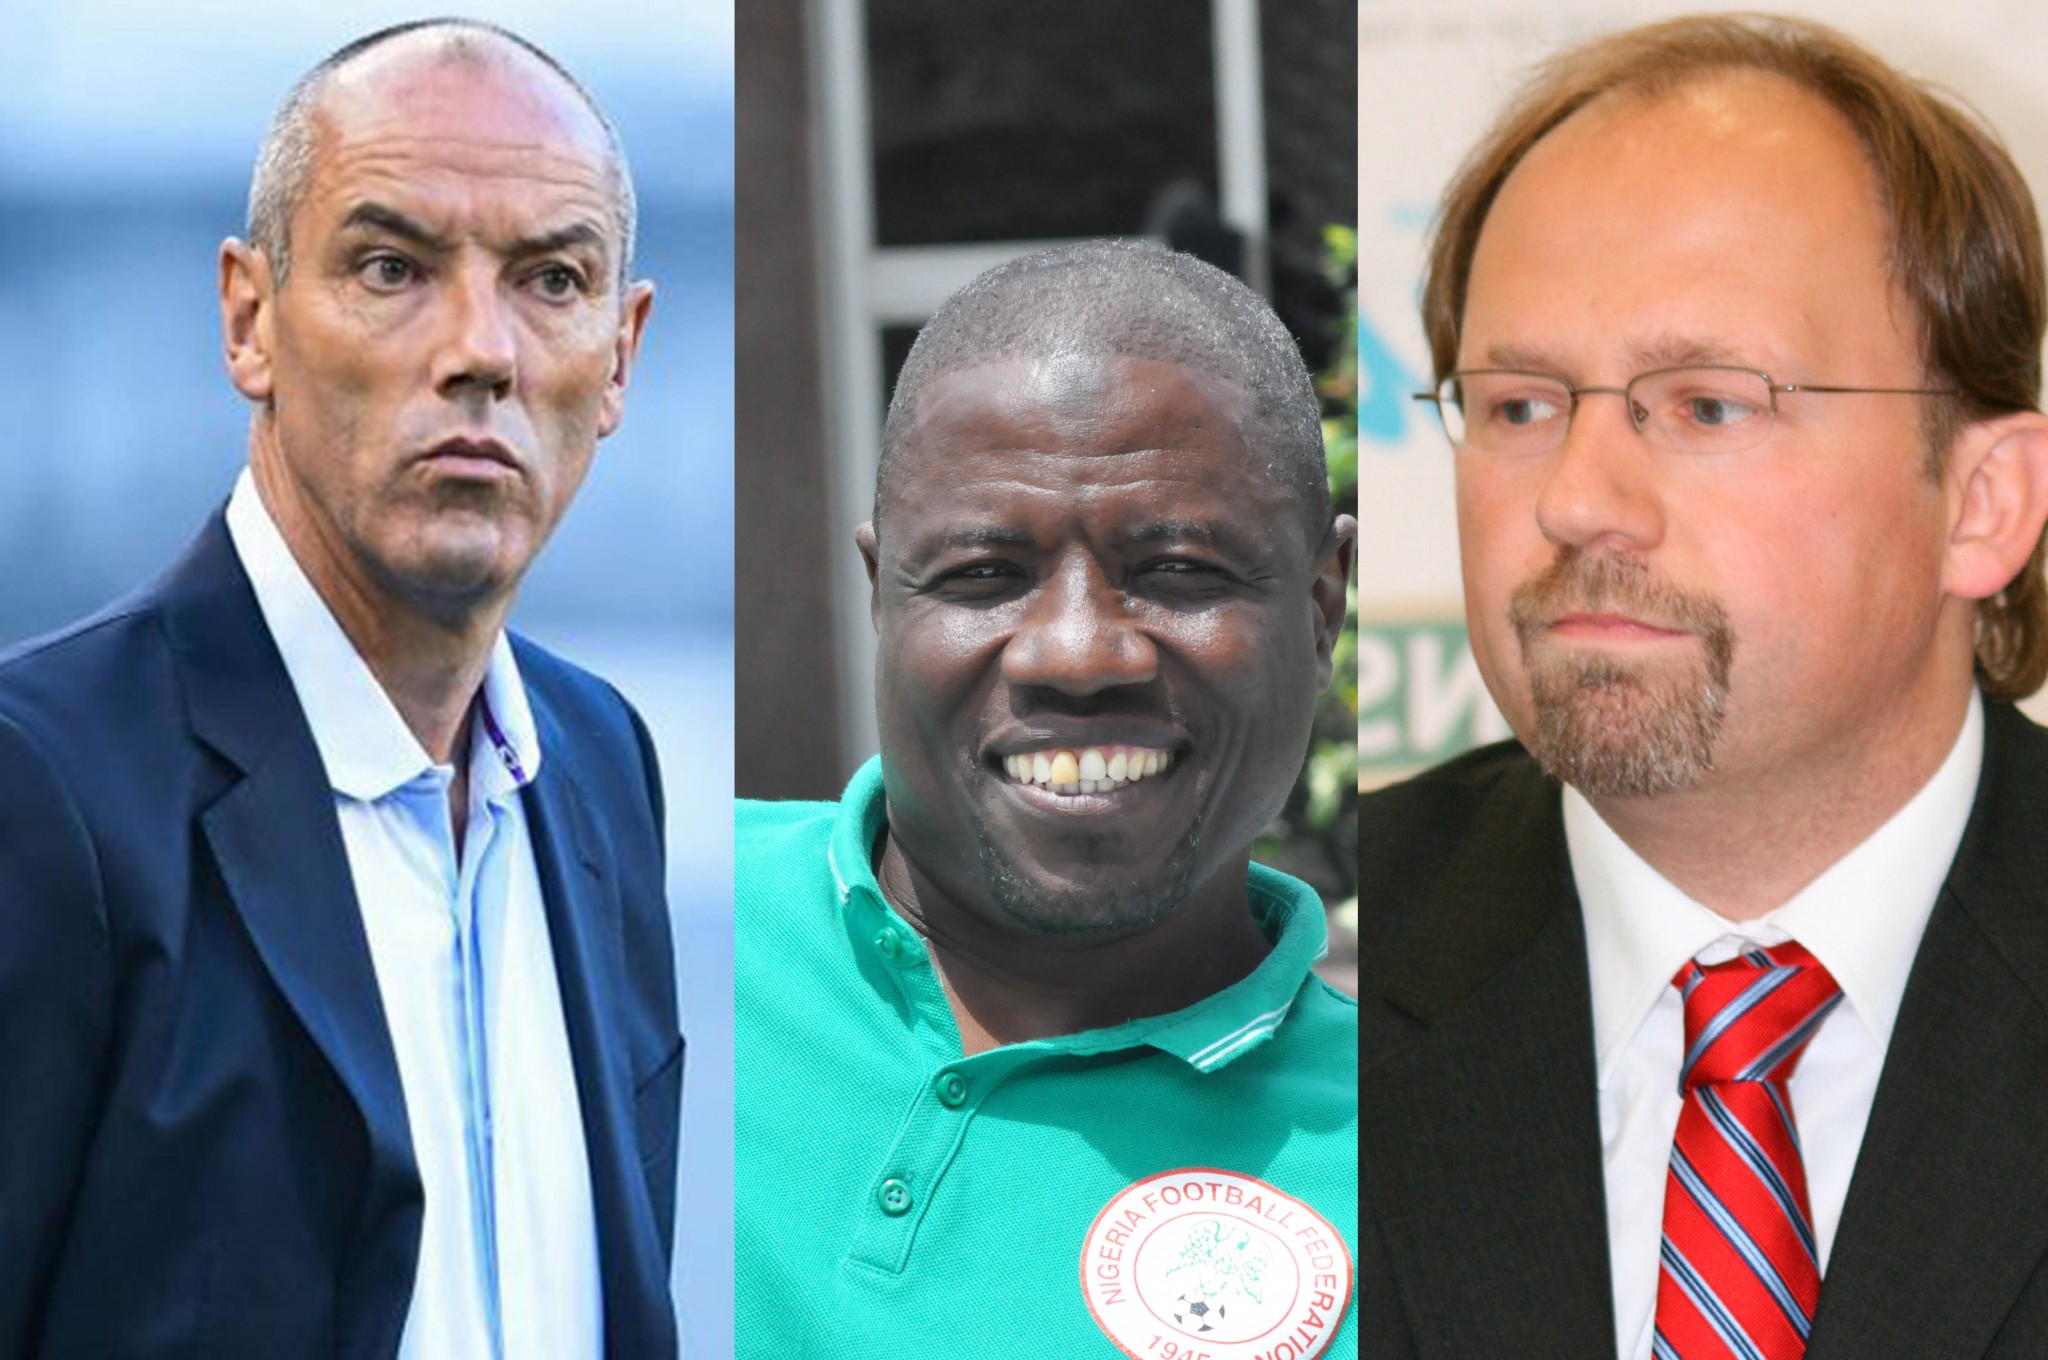 From L-R: The shortlisted canidates, former Cameroon coach Paul Le Guen, Salisu Yusuf and Tom Saintfiet